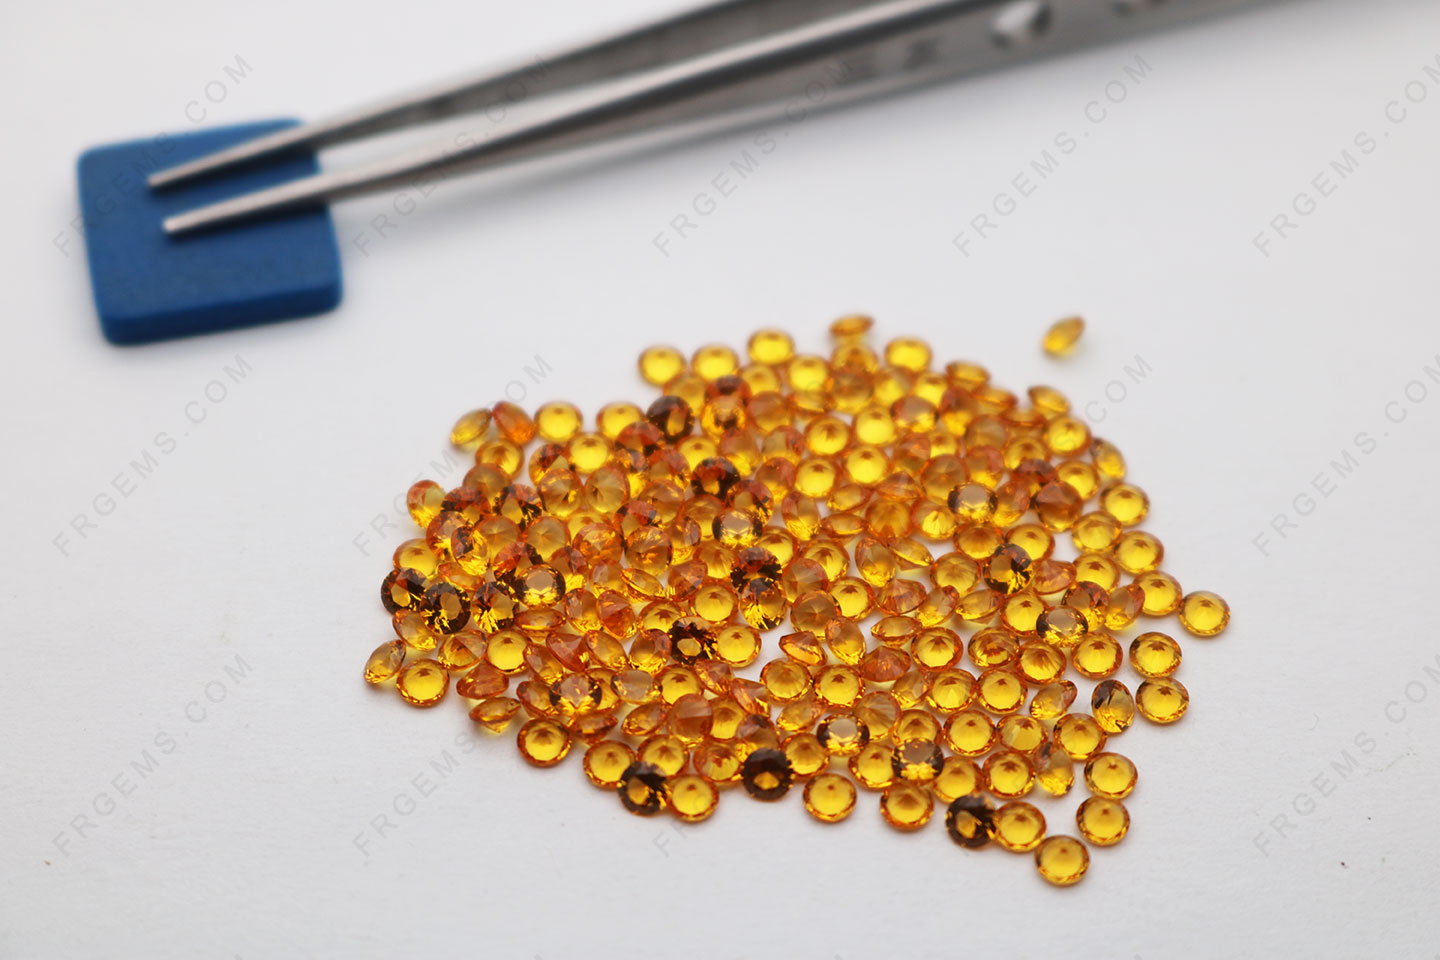 Nano Crystal Citrine Yellow #172 Dark color Round Shape Faceted Cut 3mm Gemstones supplier